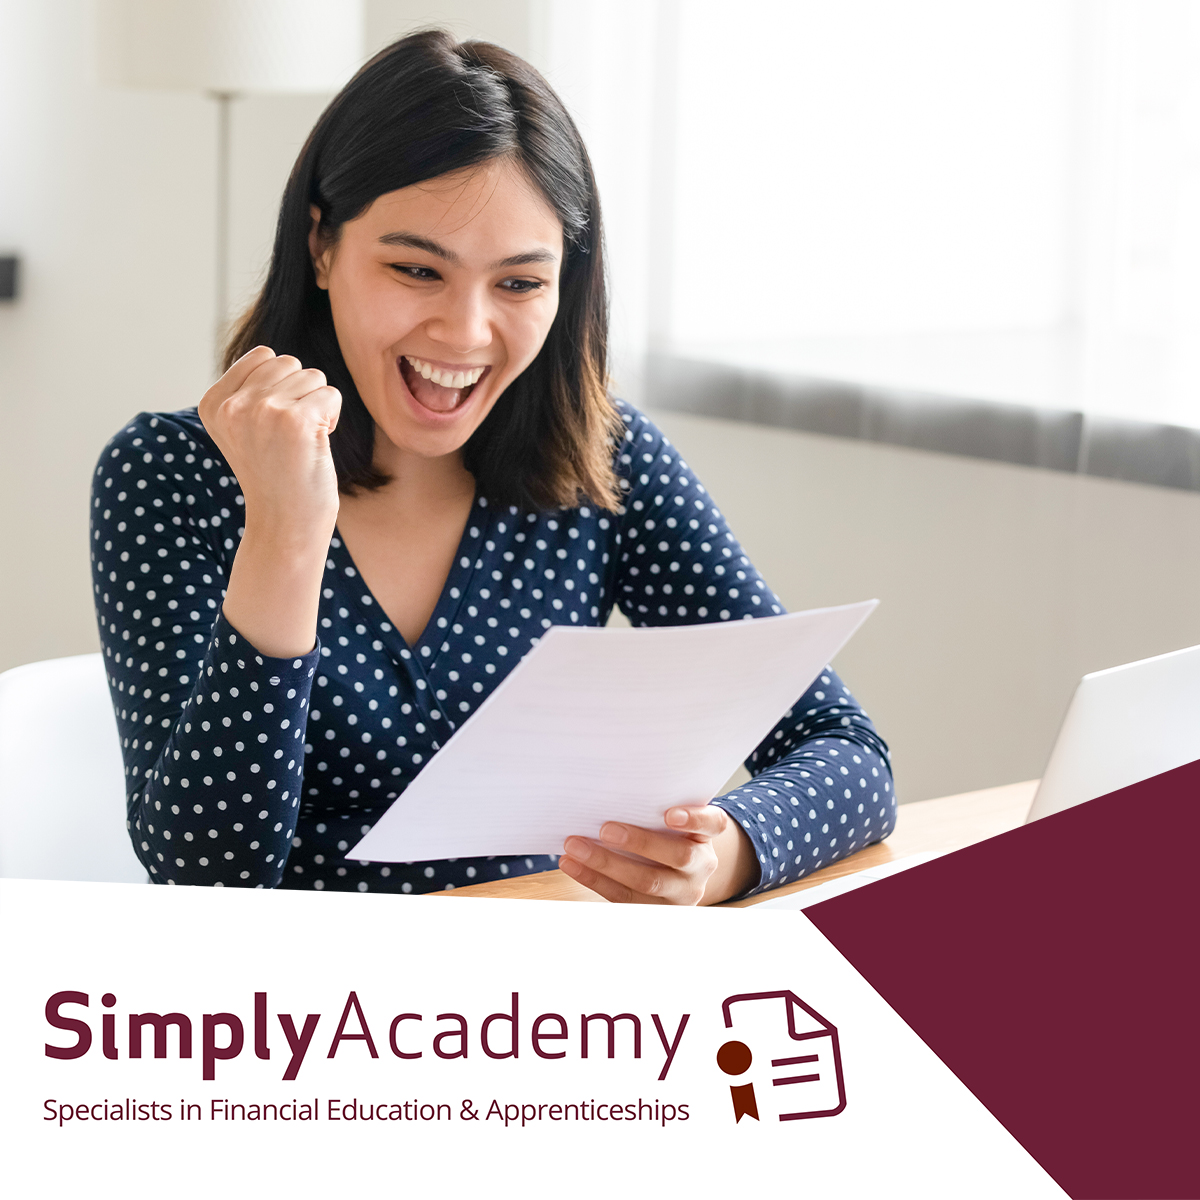 Simply Academy's experienced tutors 
➕ 
Clear #DipFA course materials  
➕ 
Learn via Live Webinar from any location 
🟰
You could qualify as a #FinancialAdviser with as little as 7 months' part-time study!

Find out more and book your course at simplyacademy.com/our-courses/di…